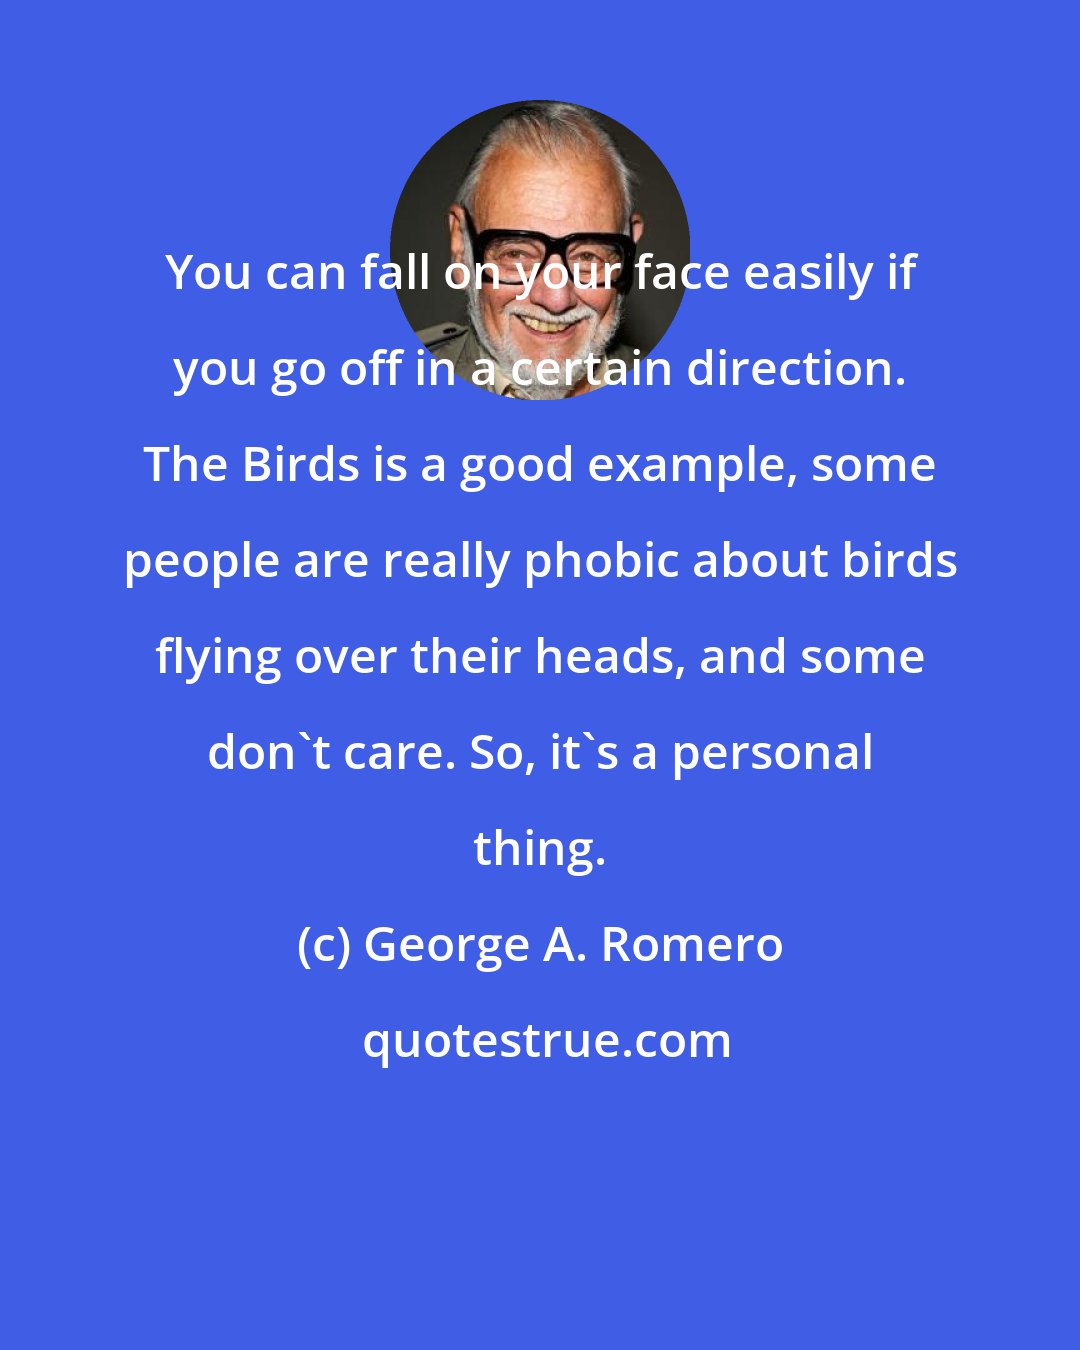 George A. Romero: You can fall on your face easily if you go off in a certain direction. The Birds is a good example, some people are really phobic about birds flying over their heads, and some don't care. So, it's a personal thing.